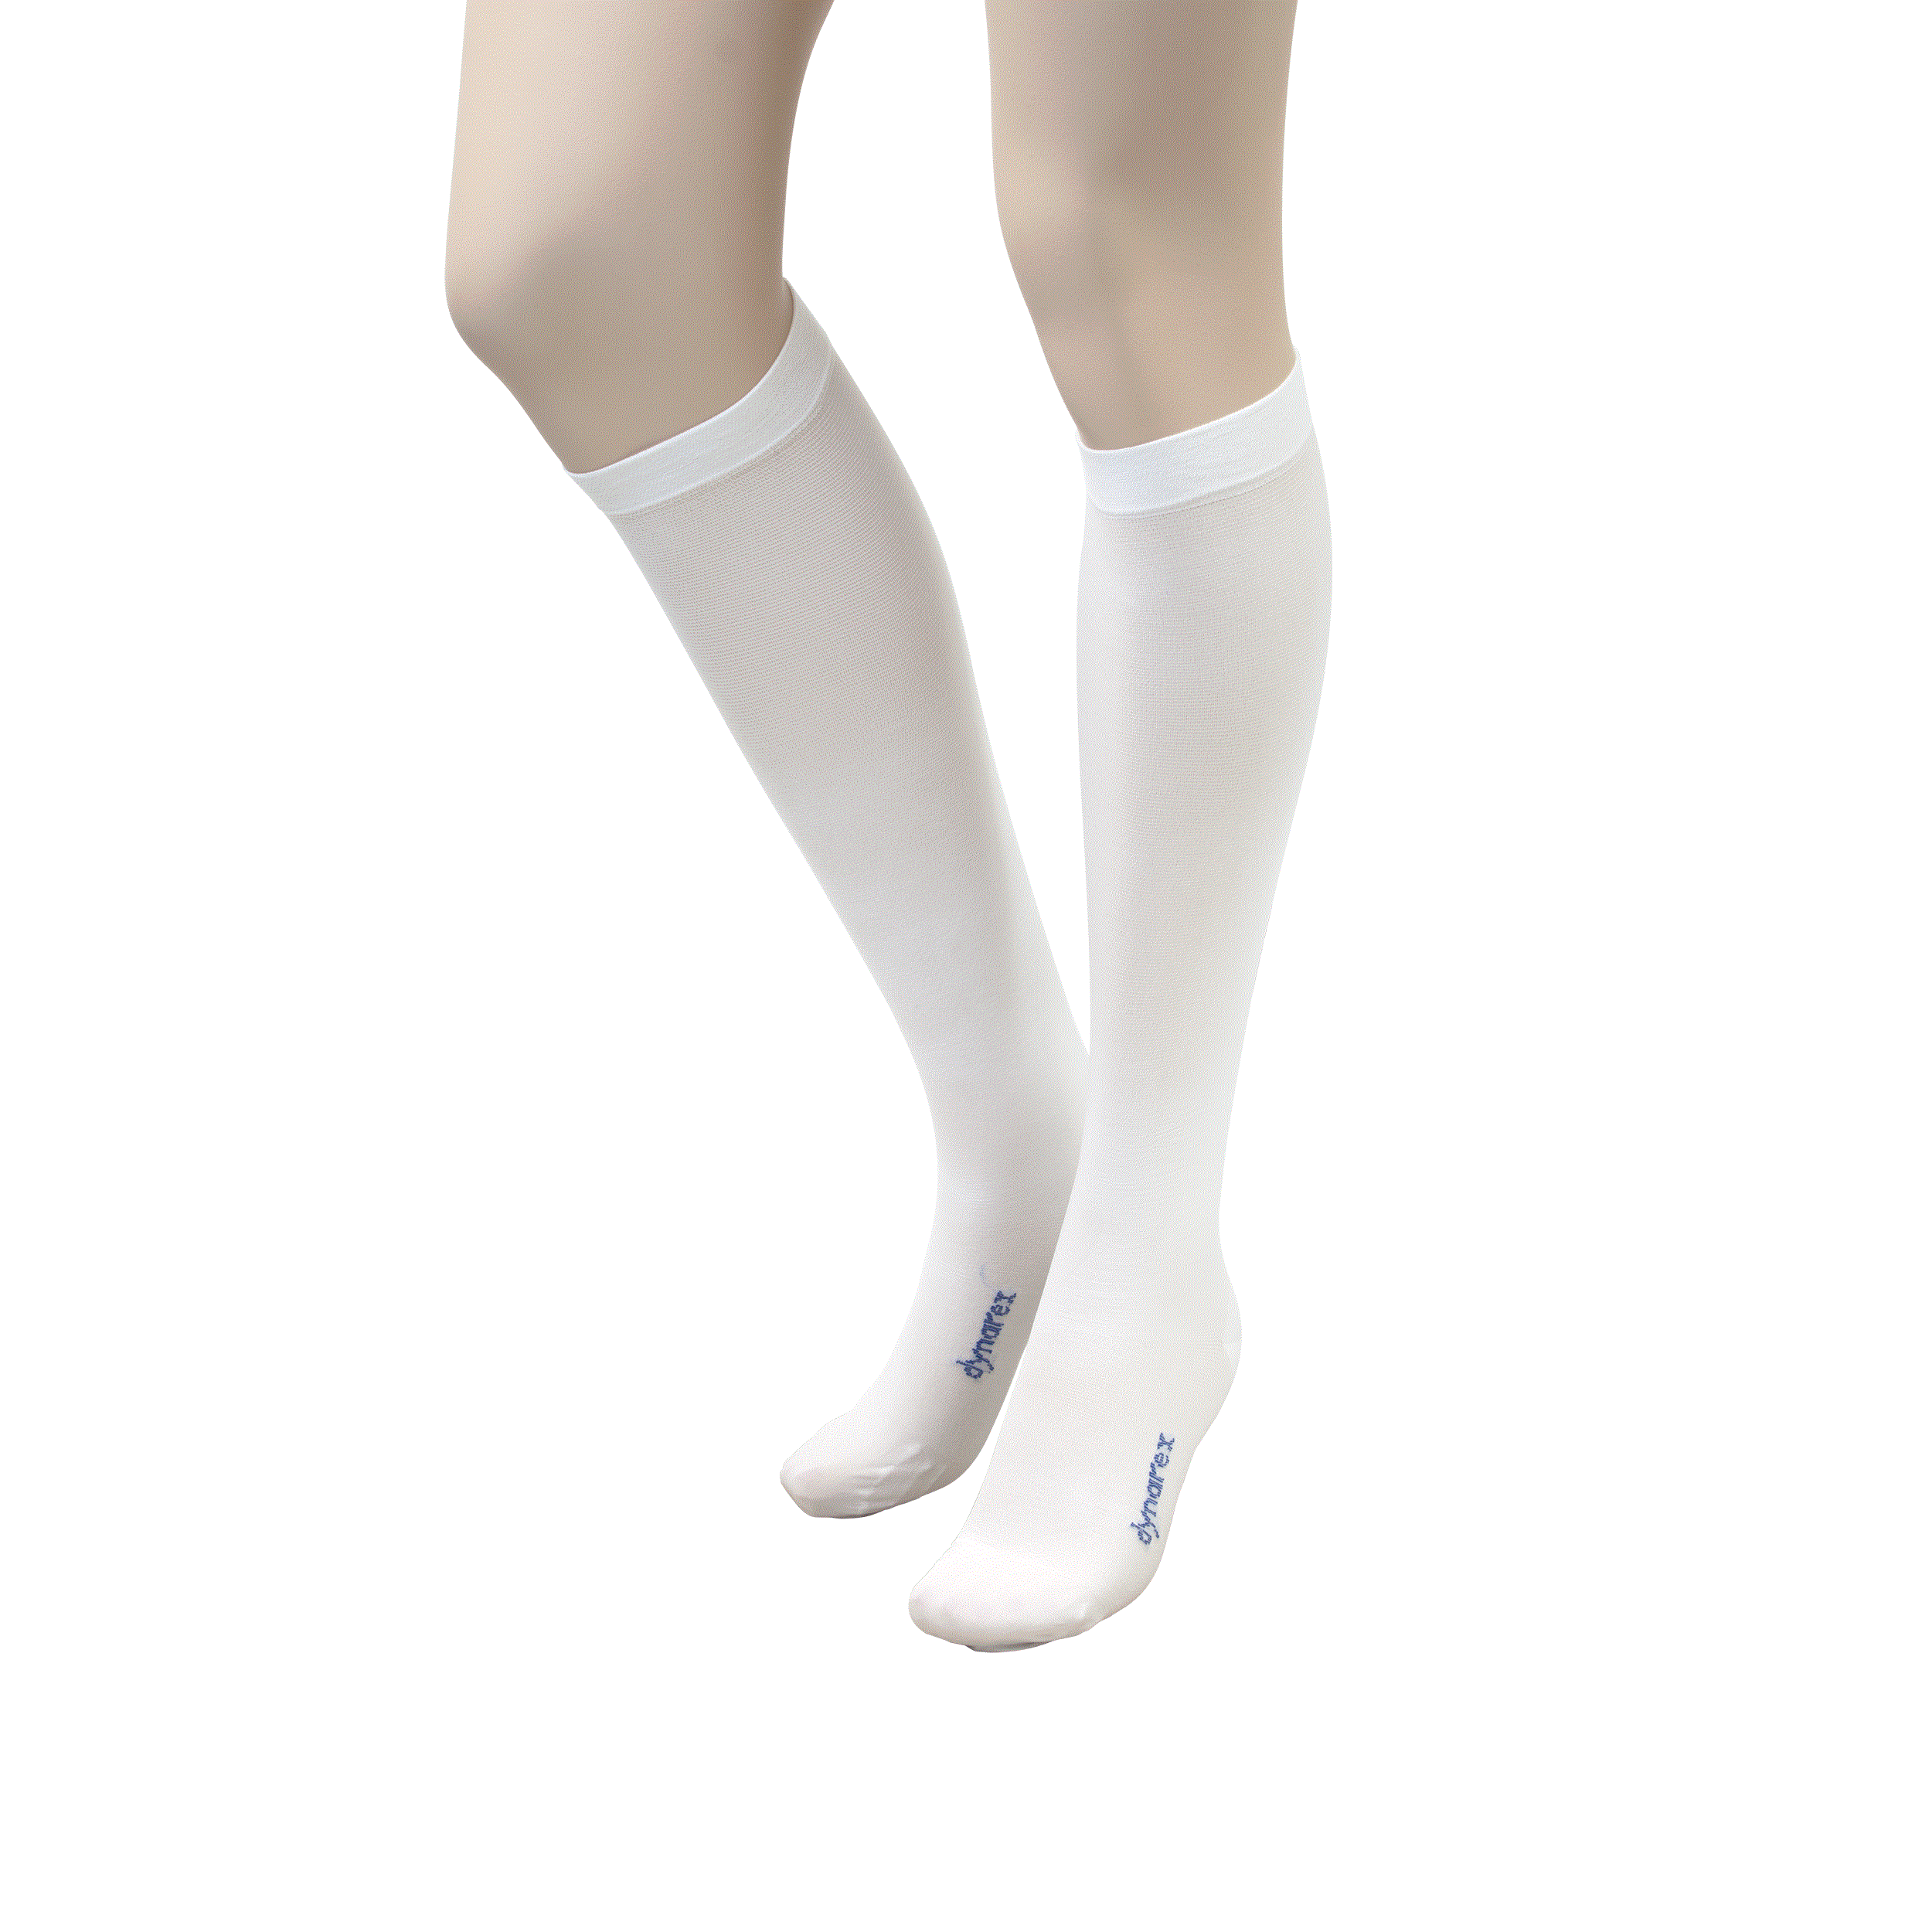 Compression Stockings Products, Supplies and Equipment